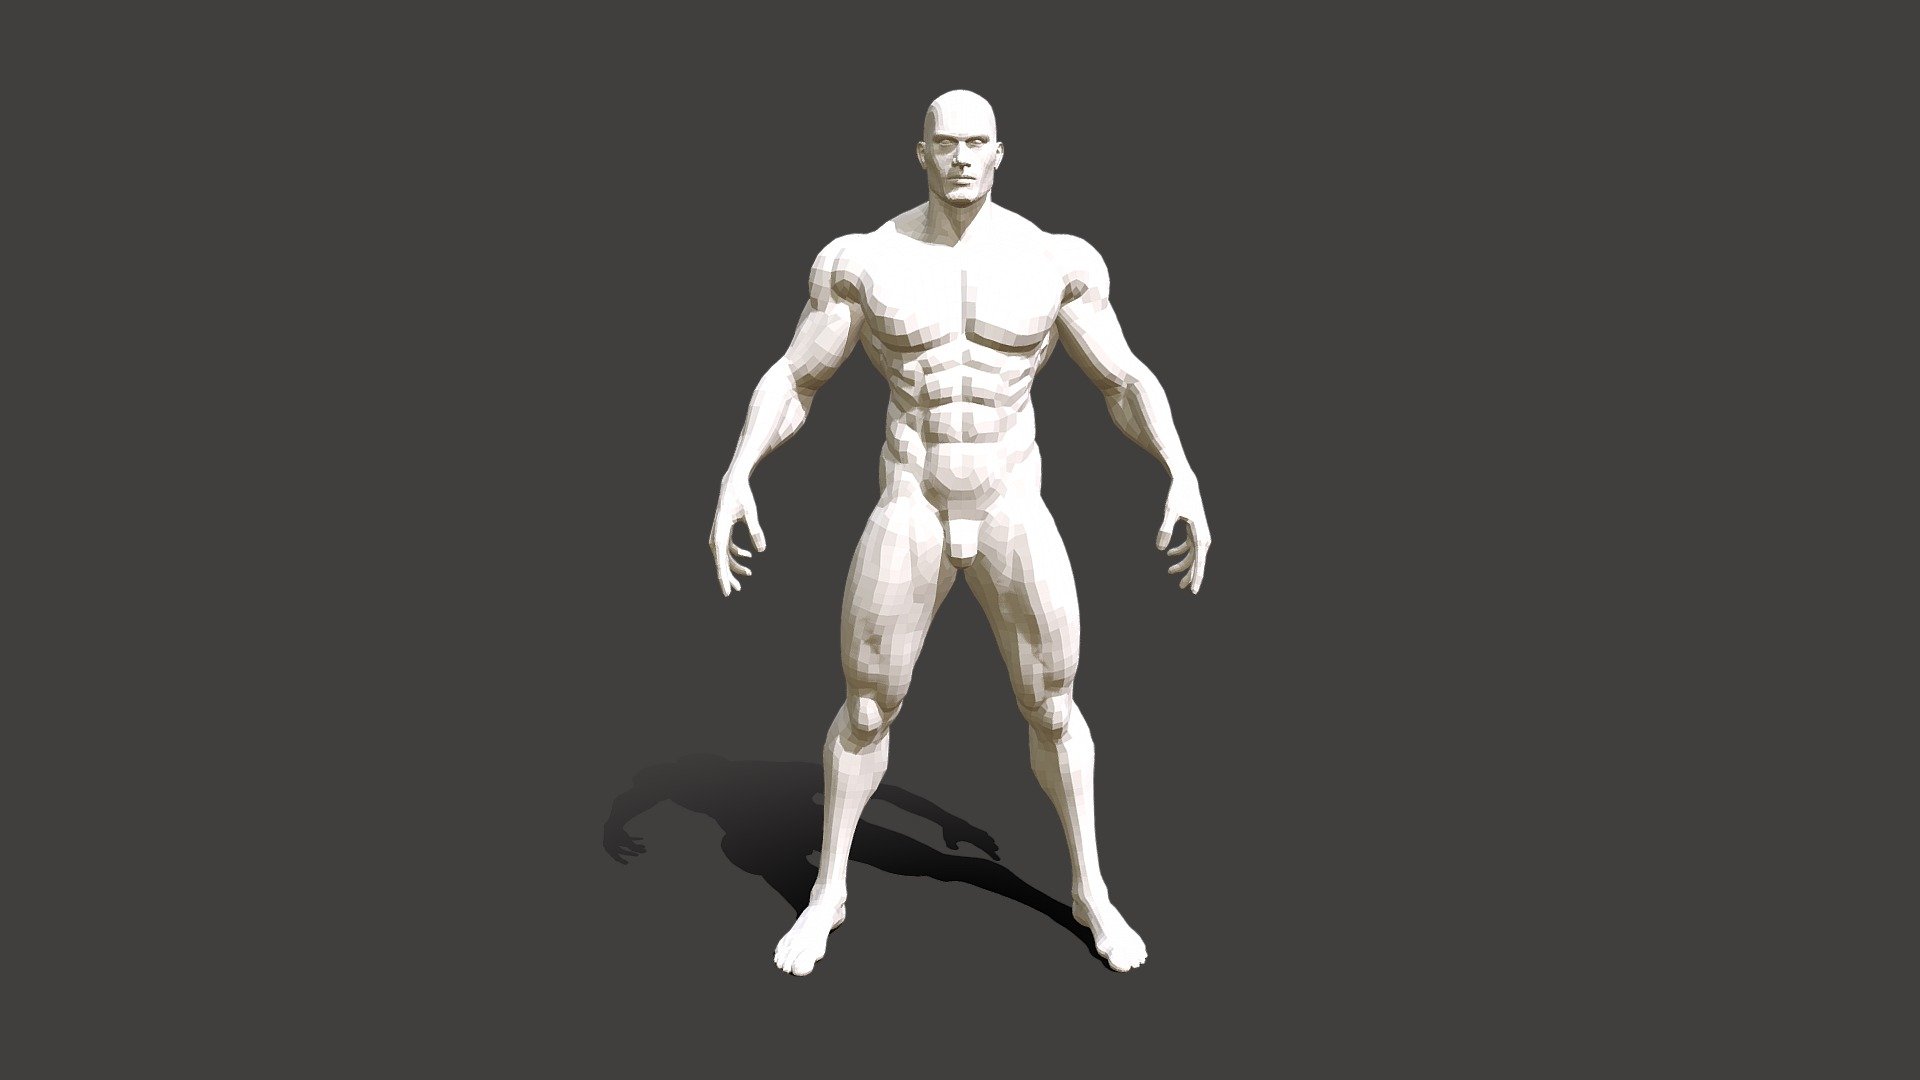 Muscular Anatomy Basemeshes (Superhuman, bulky hero, bodybuilder anatomy)

It can be used as basemesh or as an reference for your sculpt projects

There are Muscular Male Anatomy.rar file with high-poly, separated high-poly and low-poly for subdivisions (not for game baking)




native Blender files (.blend format for Blender)

high-poly mesh (5 443 000 polygons)

Rigged low-poly mesh for subdivisions [not Game-Rady!] (34 476 polygons)

How to use rigged masemesh, in my youtube chanel: https://youtu.be/l29Uqabok0I?si=qJPAisYBnECZ7_o3

All the best : ) - Muscular Basemeshes, low & high poly, rigged - Buy Royalty Free 3D model by SakoSculpt 3d model